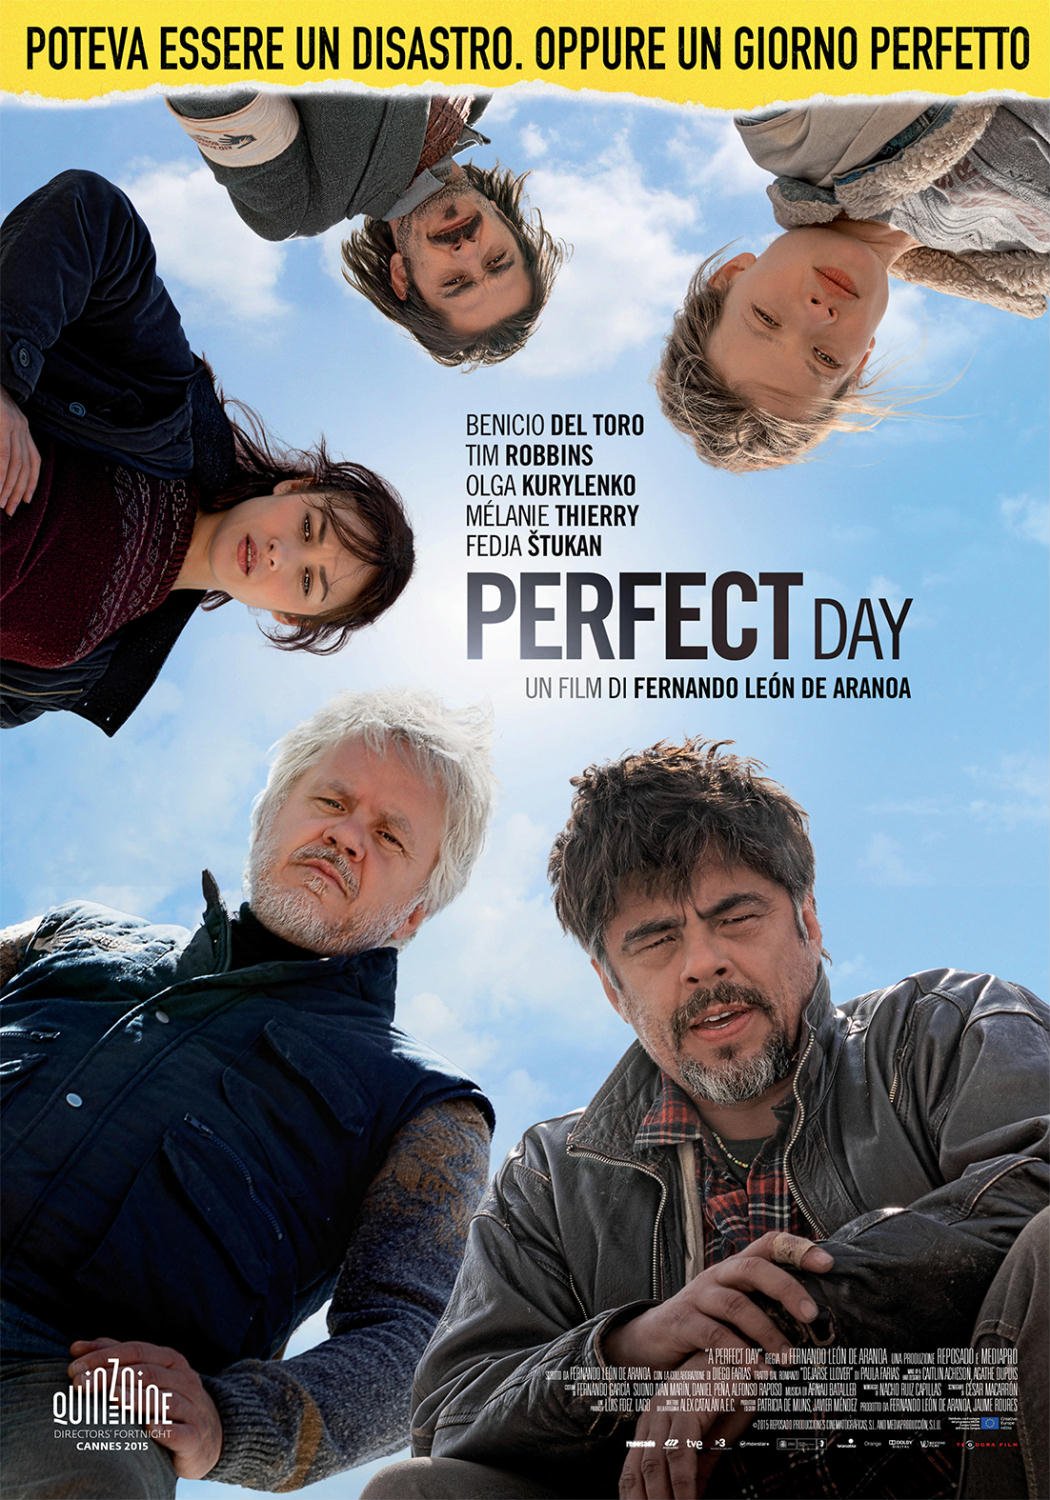 movie a perfect day